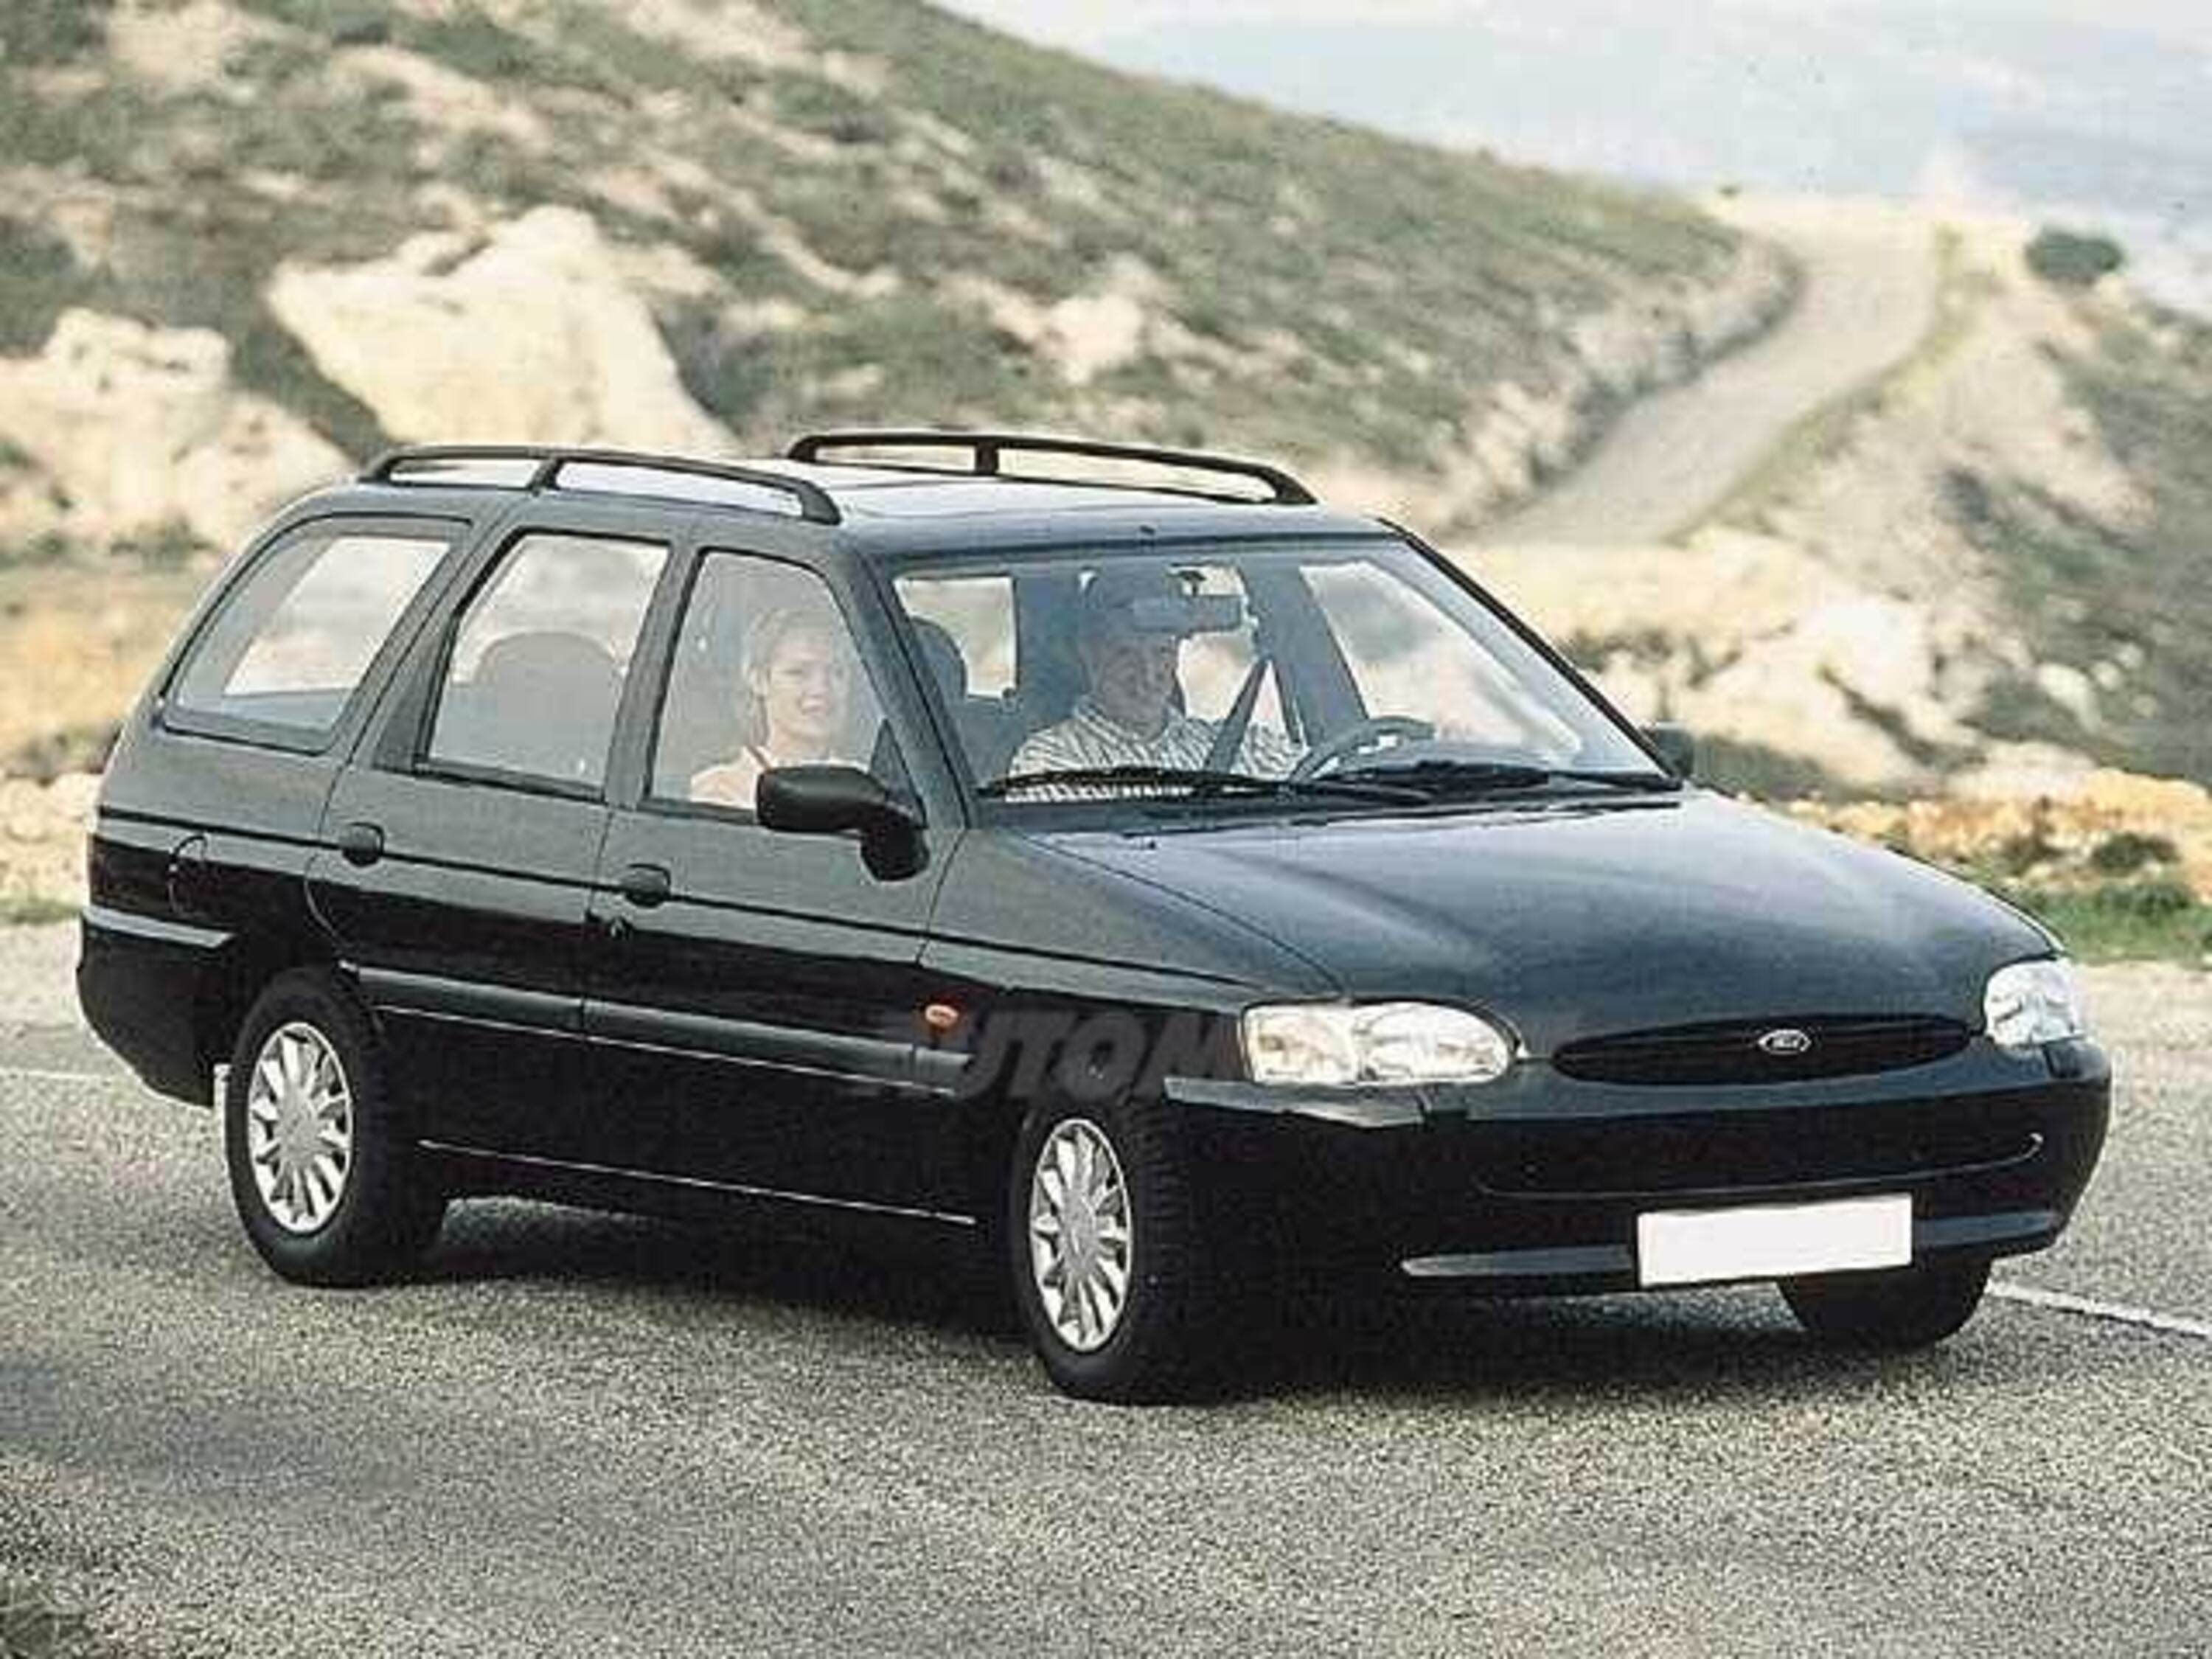 Ford Escort/Orion Station Wagon 1.8 diesel cat Station Wagon CL